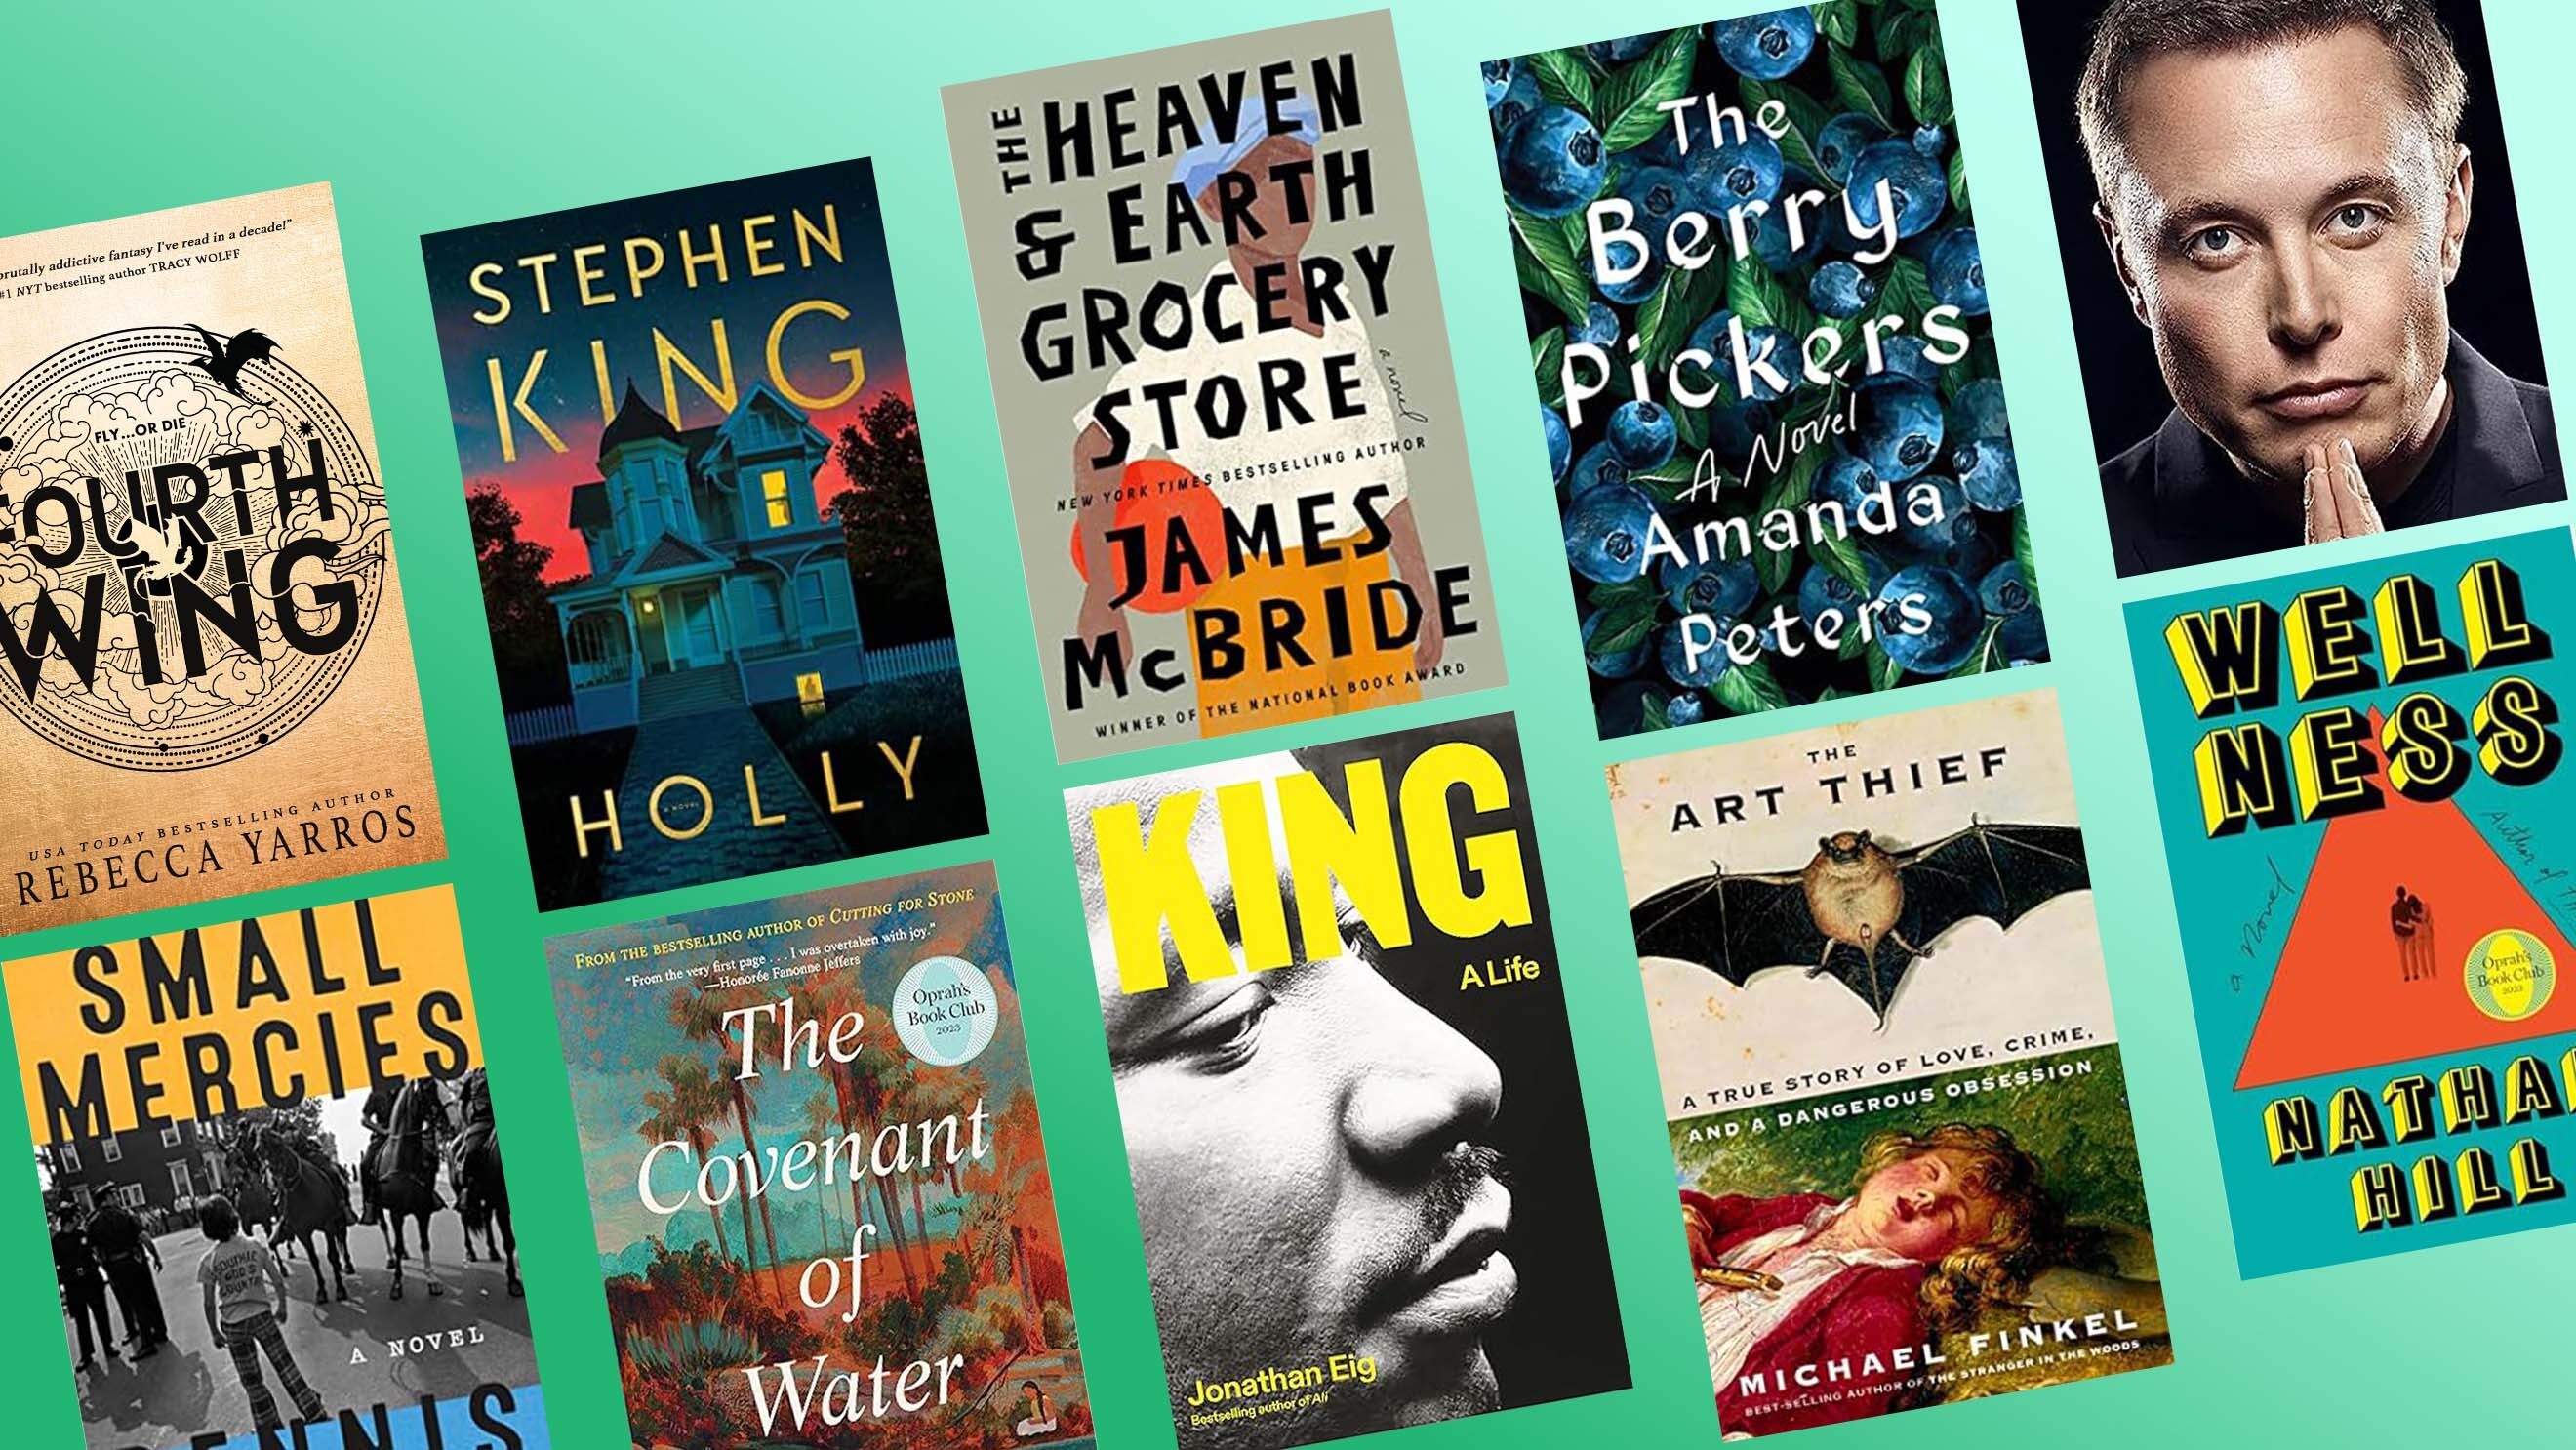 An image of 10 book covers featured on the Best Books of 2023 list according to Amazon editors.